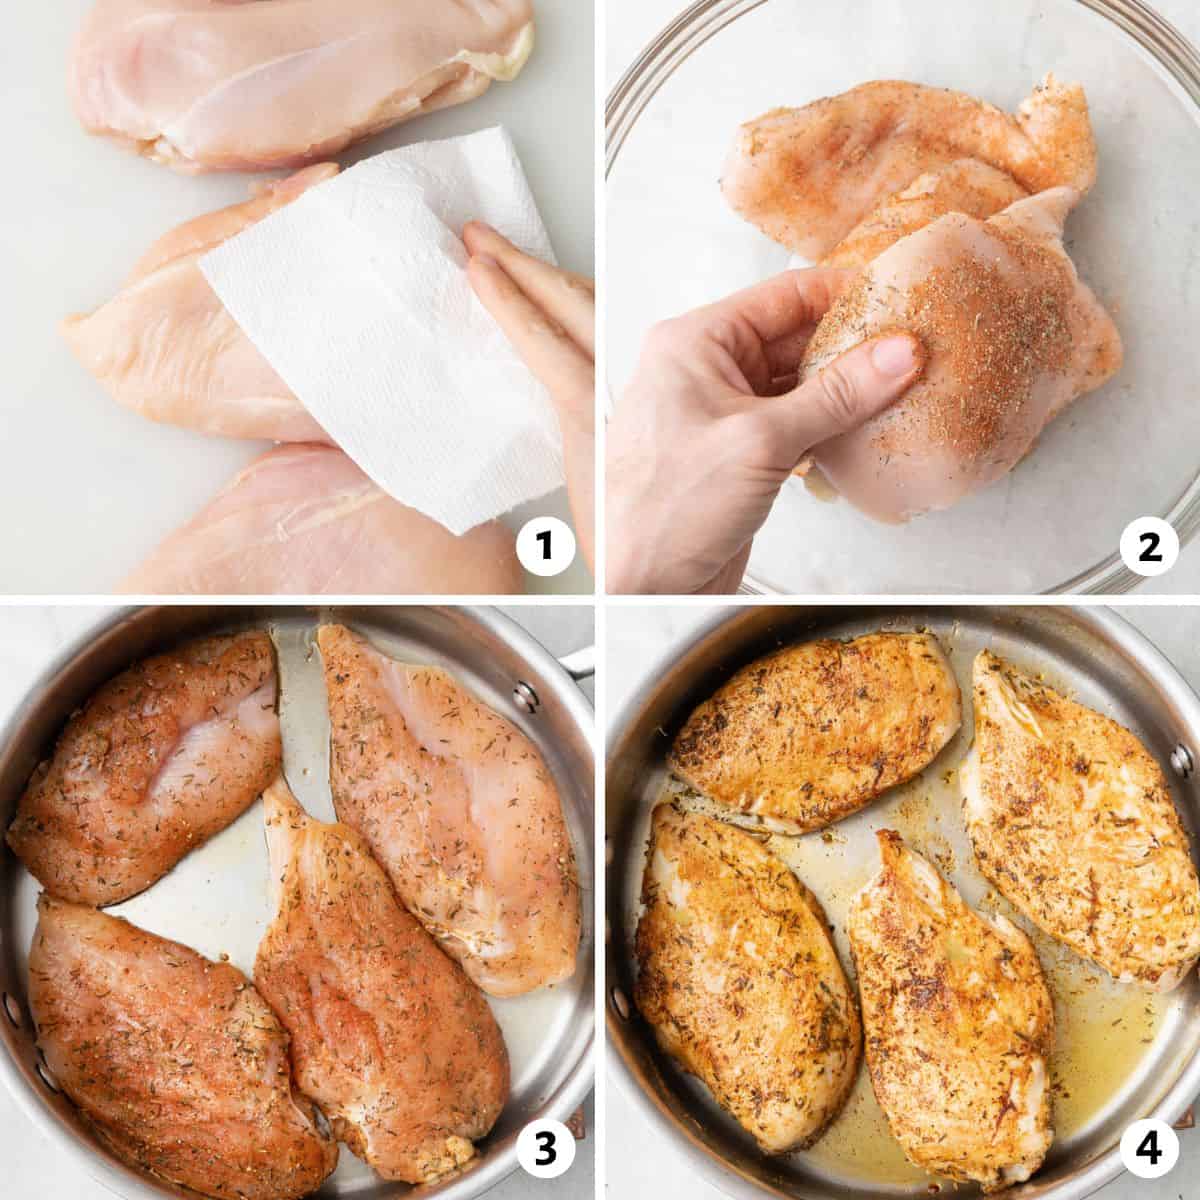 4 image collage making recipe: 1- chicken breasts on a cutting board with paper towels patting them dry, 2- coating chicken with dry rub, 3- seasoned chicken in a skillet before cooking, 4- after cooking.